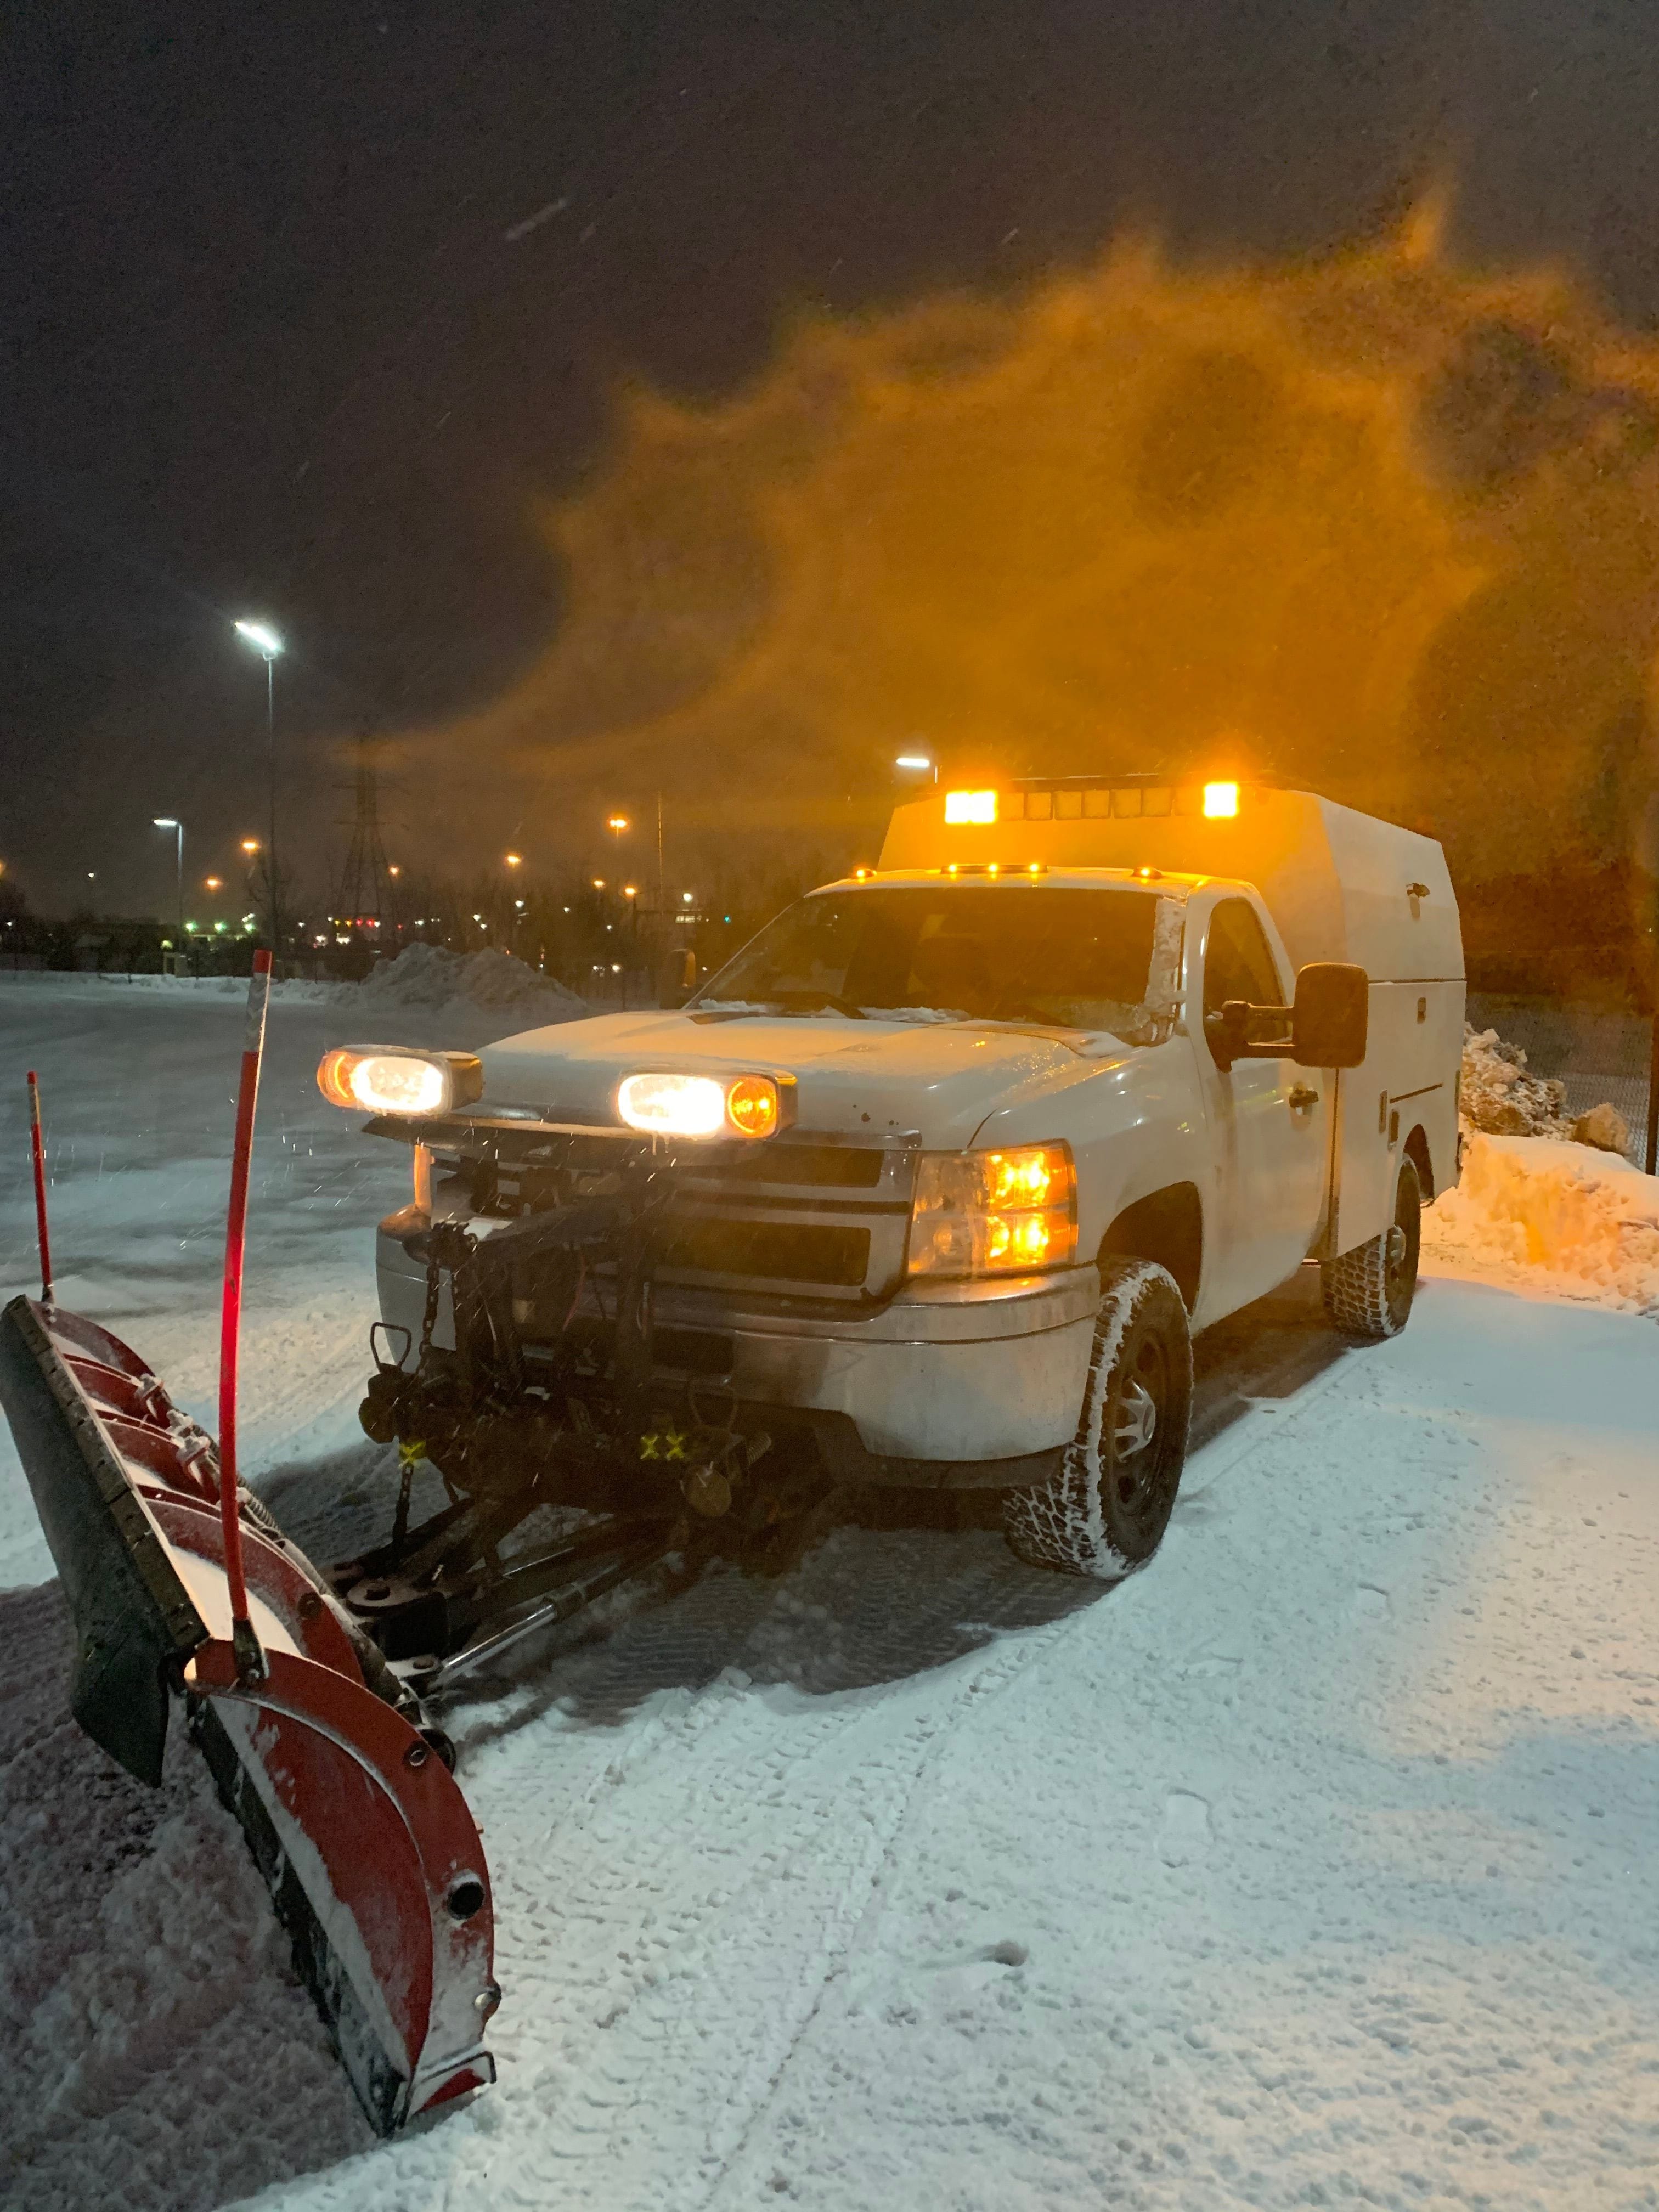 a snow plow plowing snow